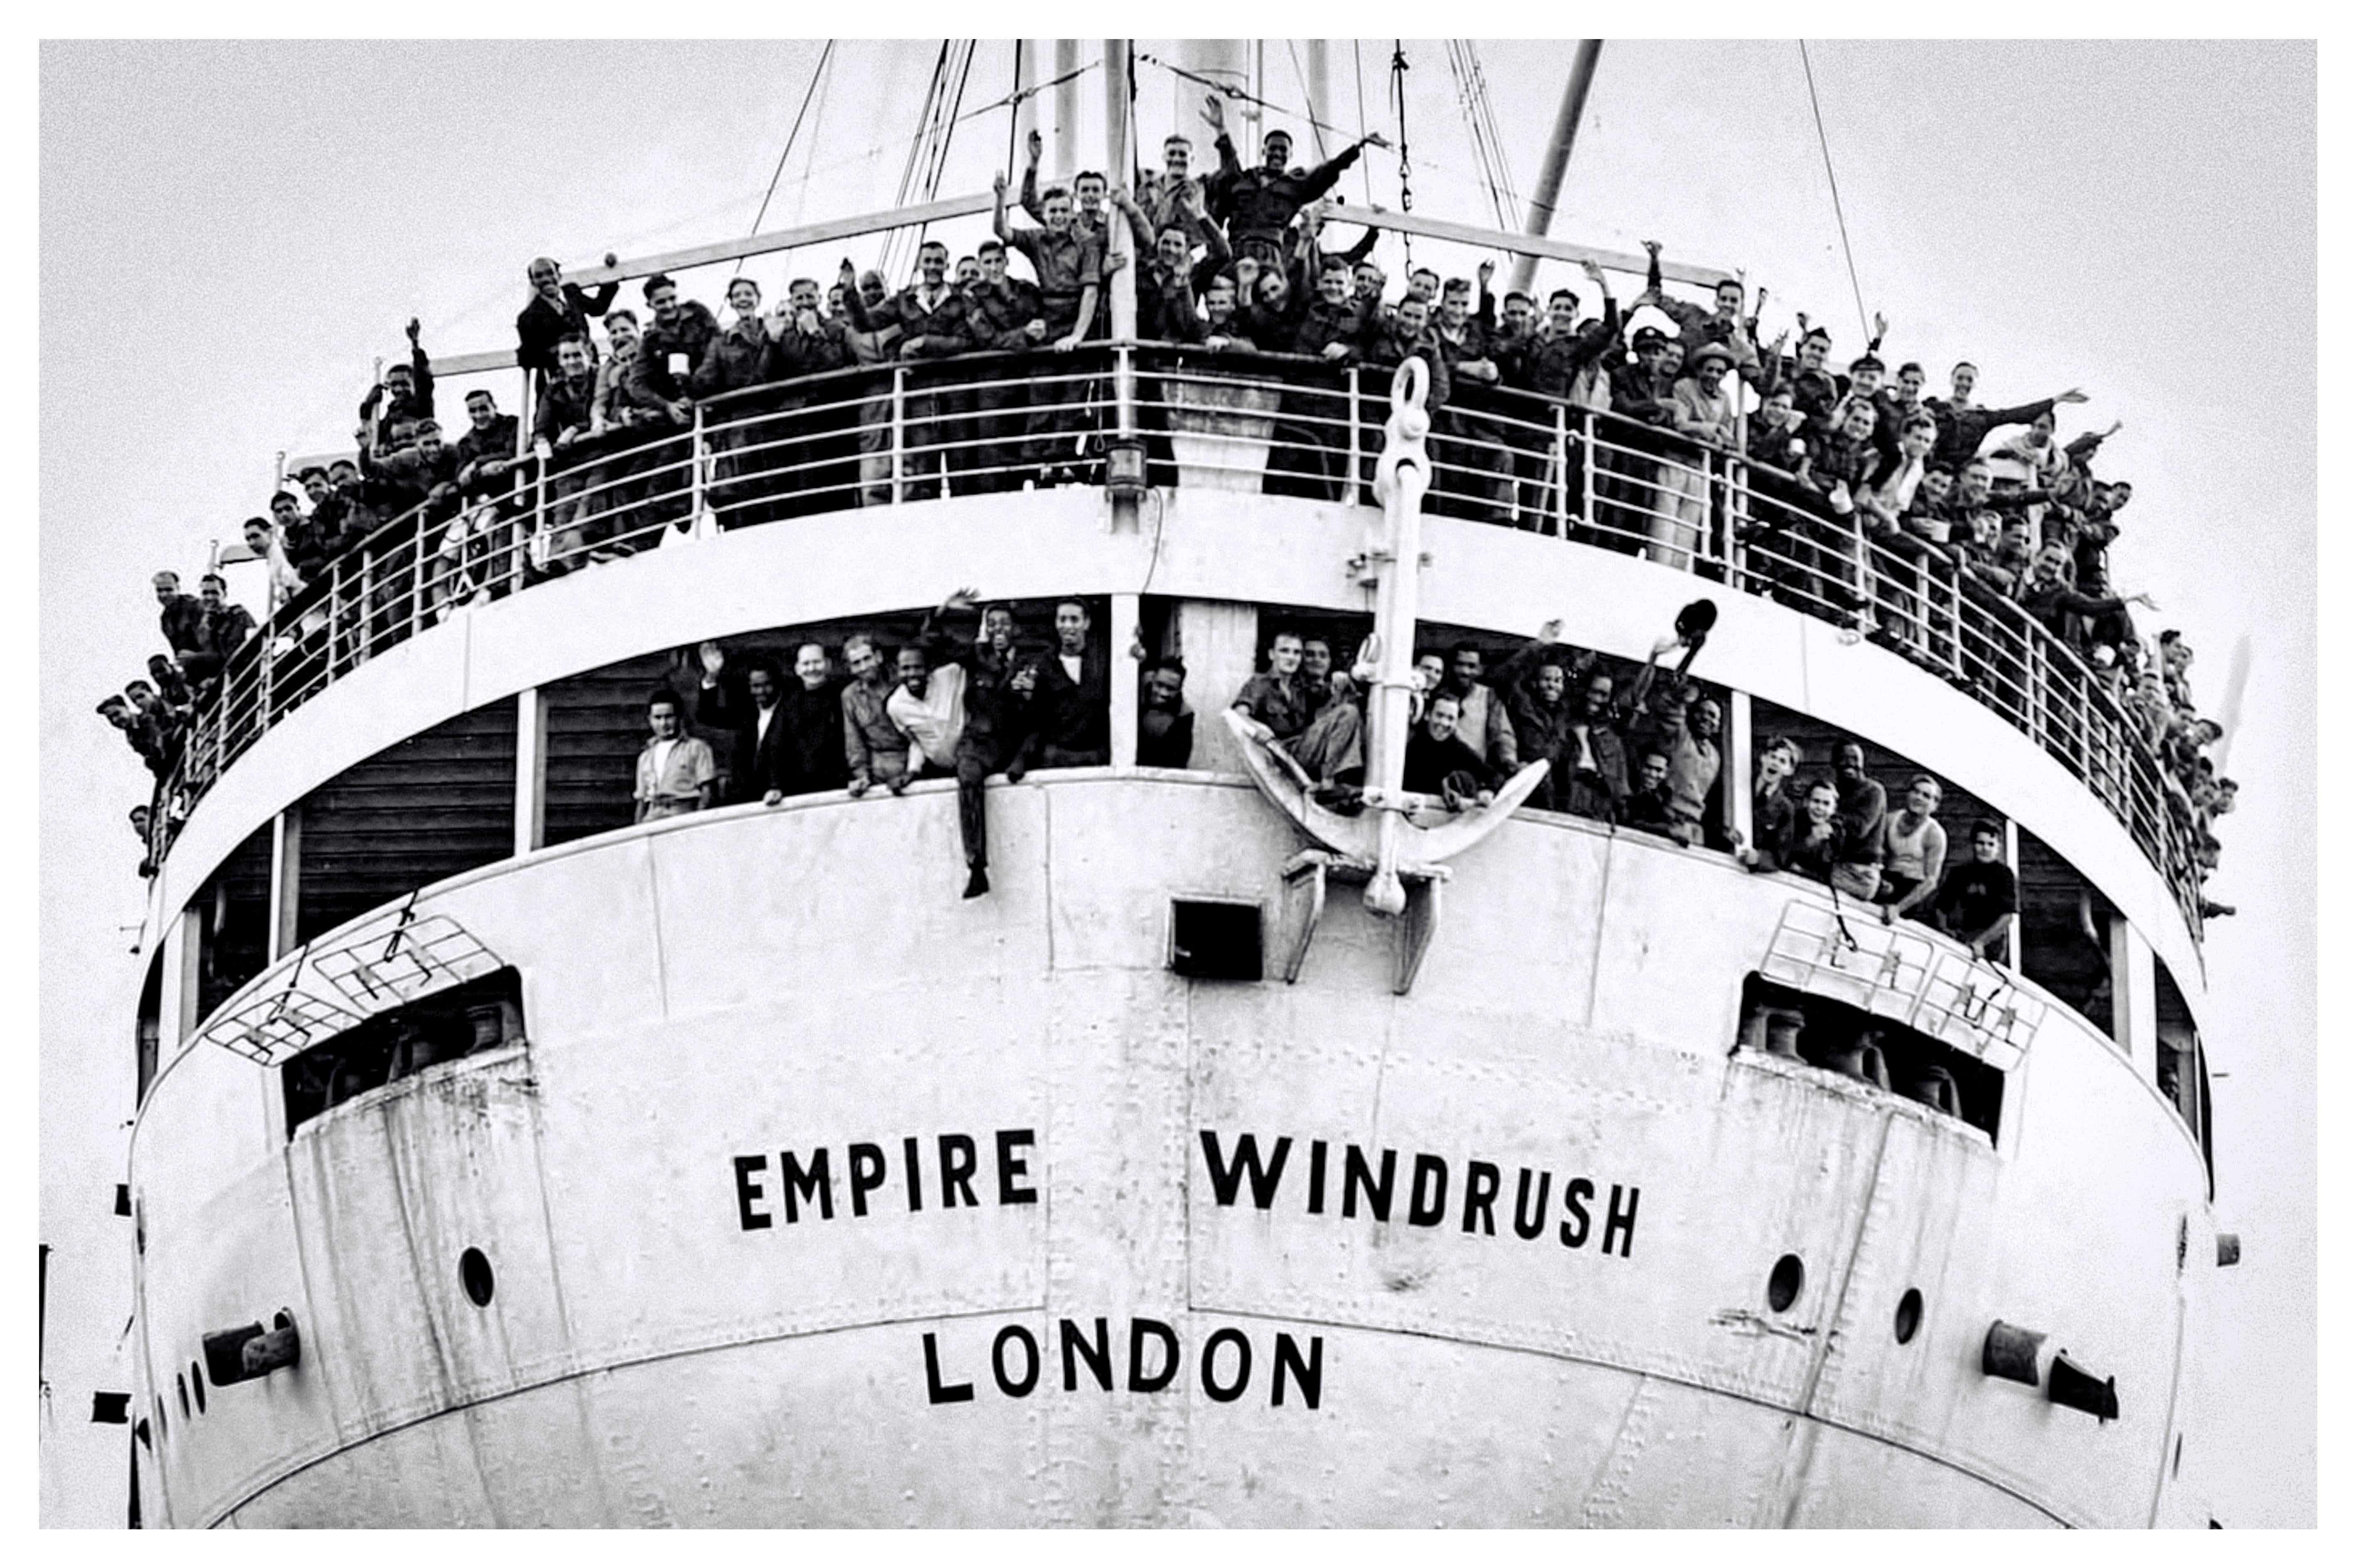 Empire Windrush arrives packed with West Indian immigrants at Tilbury Docks on the River Thames in Essex on 22 June 1948